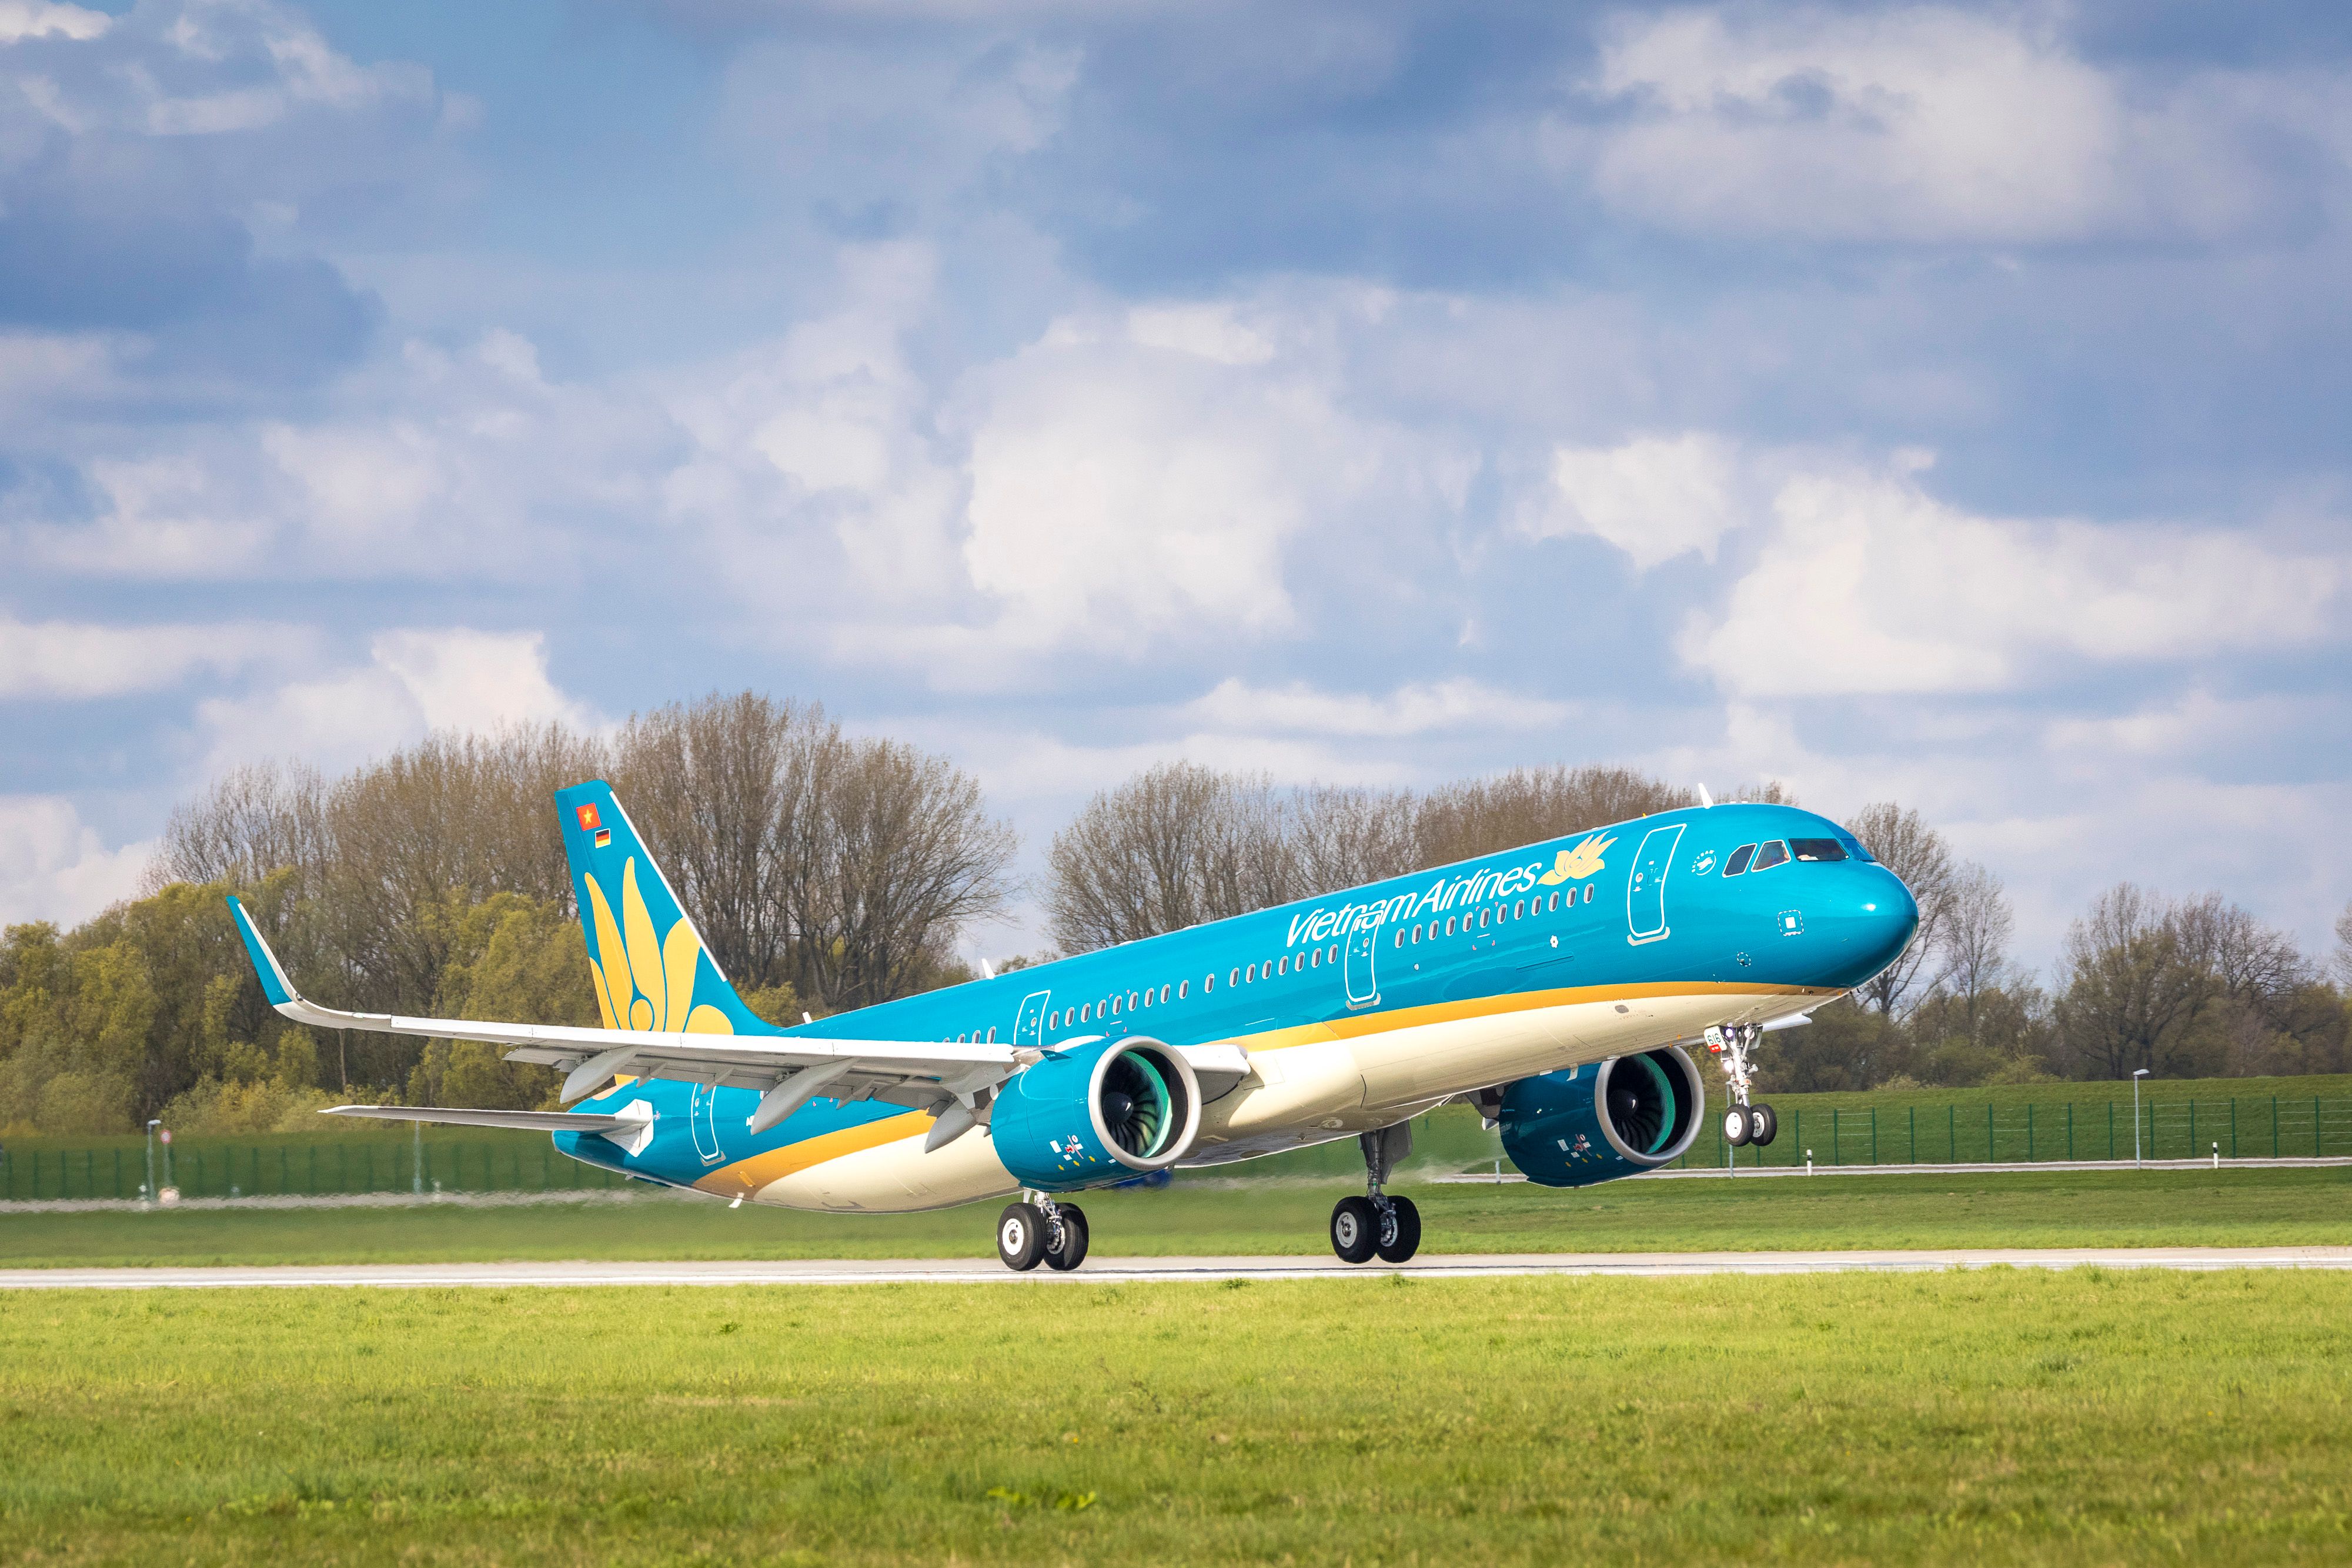 Airbus A321neo Vietnam Airlines